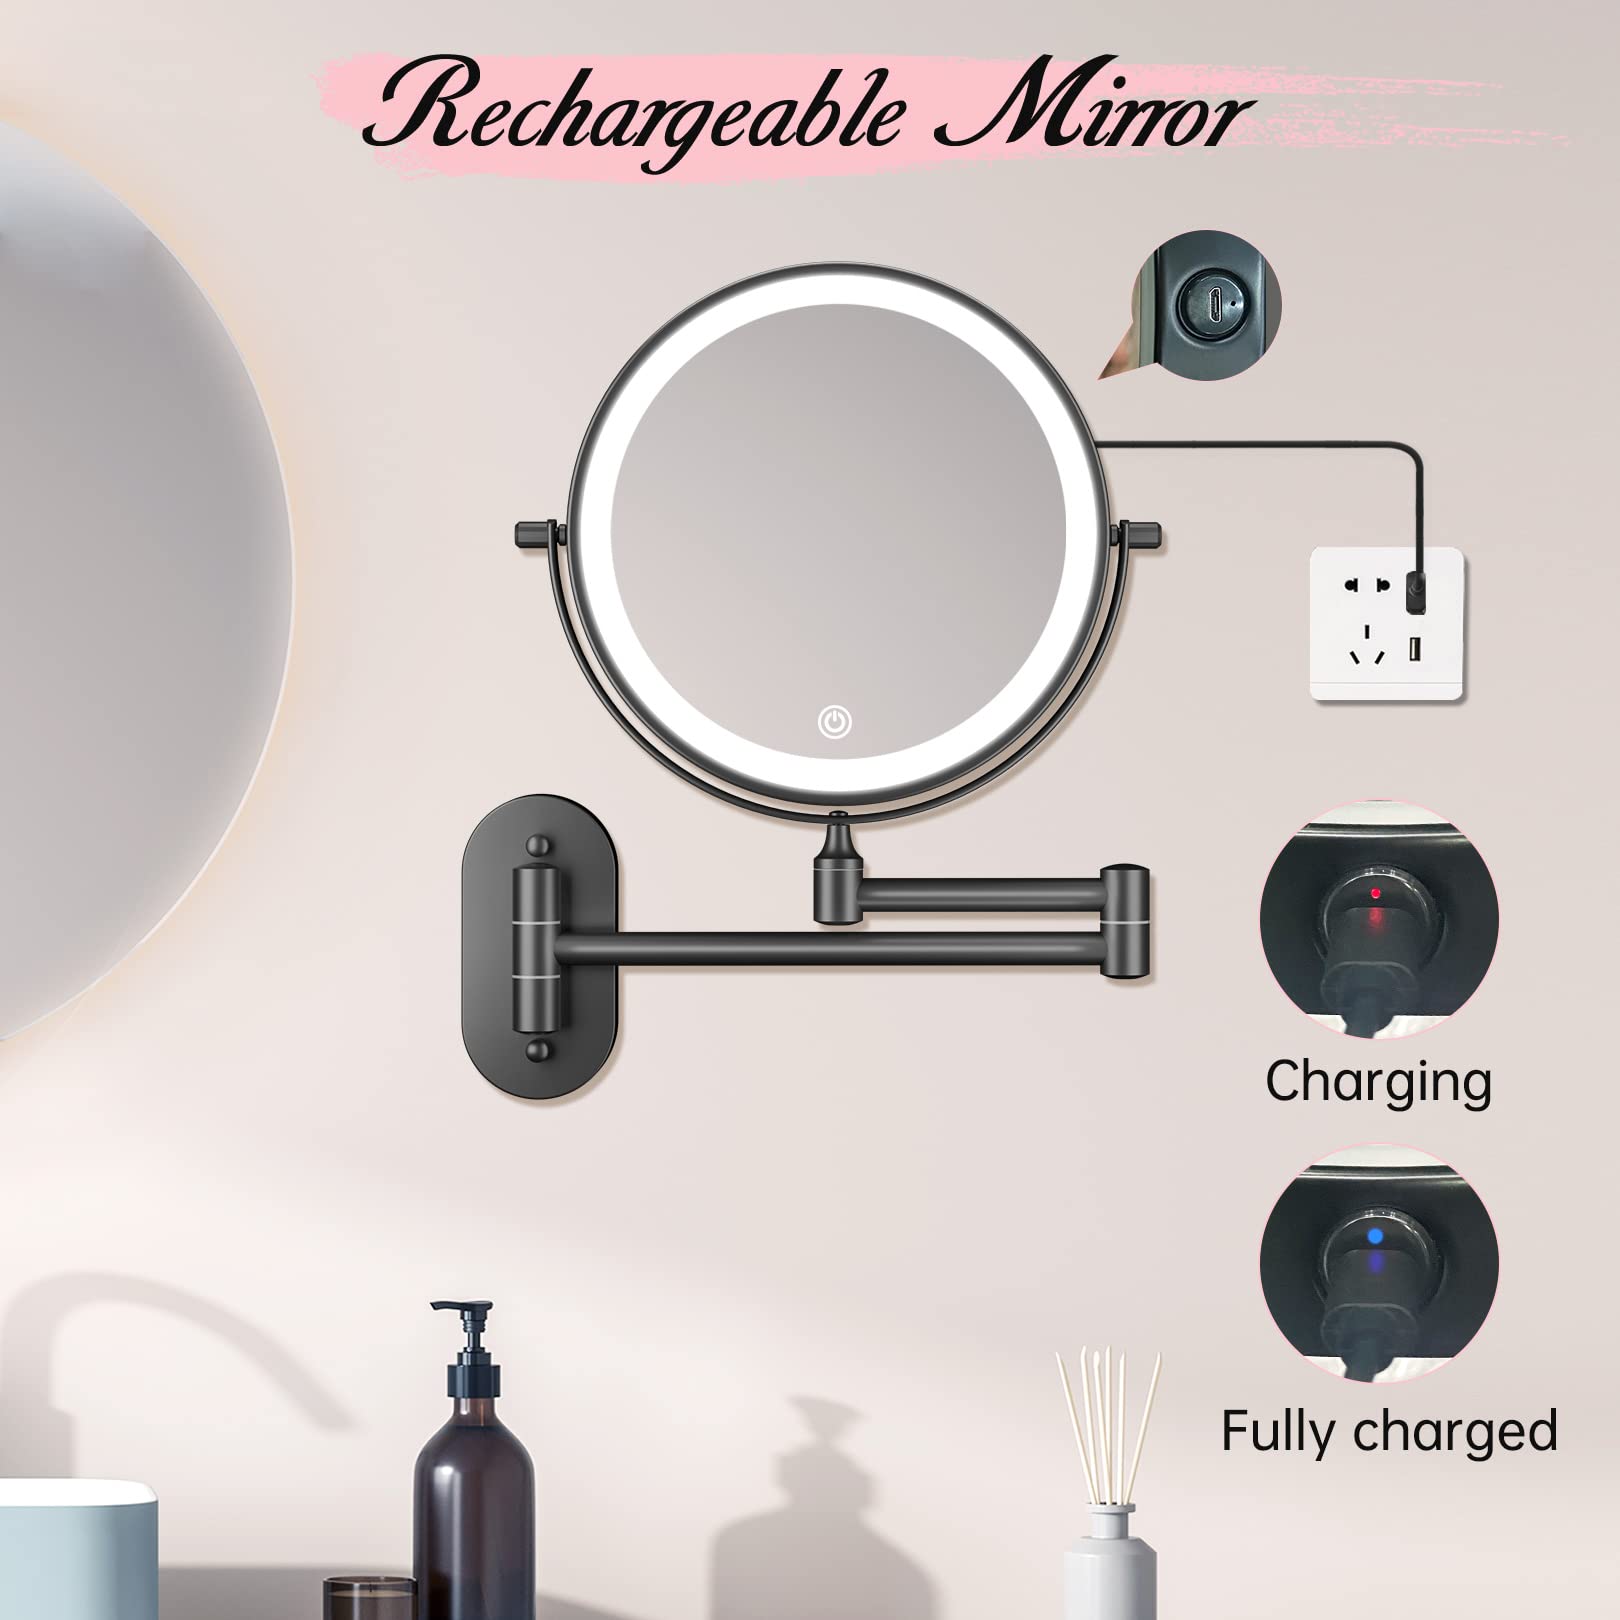 FASCINATE Rechargeable Wall Mounted Lighted Vanity Mirror 8 Inch 1X/10X Magnifying Makeup Mirror with 3 Color Lights, Double Sided Dimmable, 360 Degree Screen Touch,Bathroom Shaving Mirror (Black)